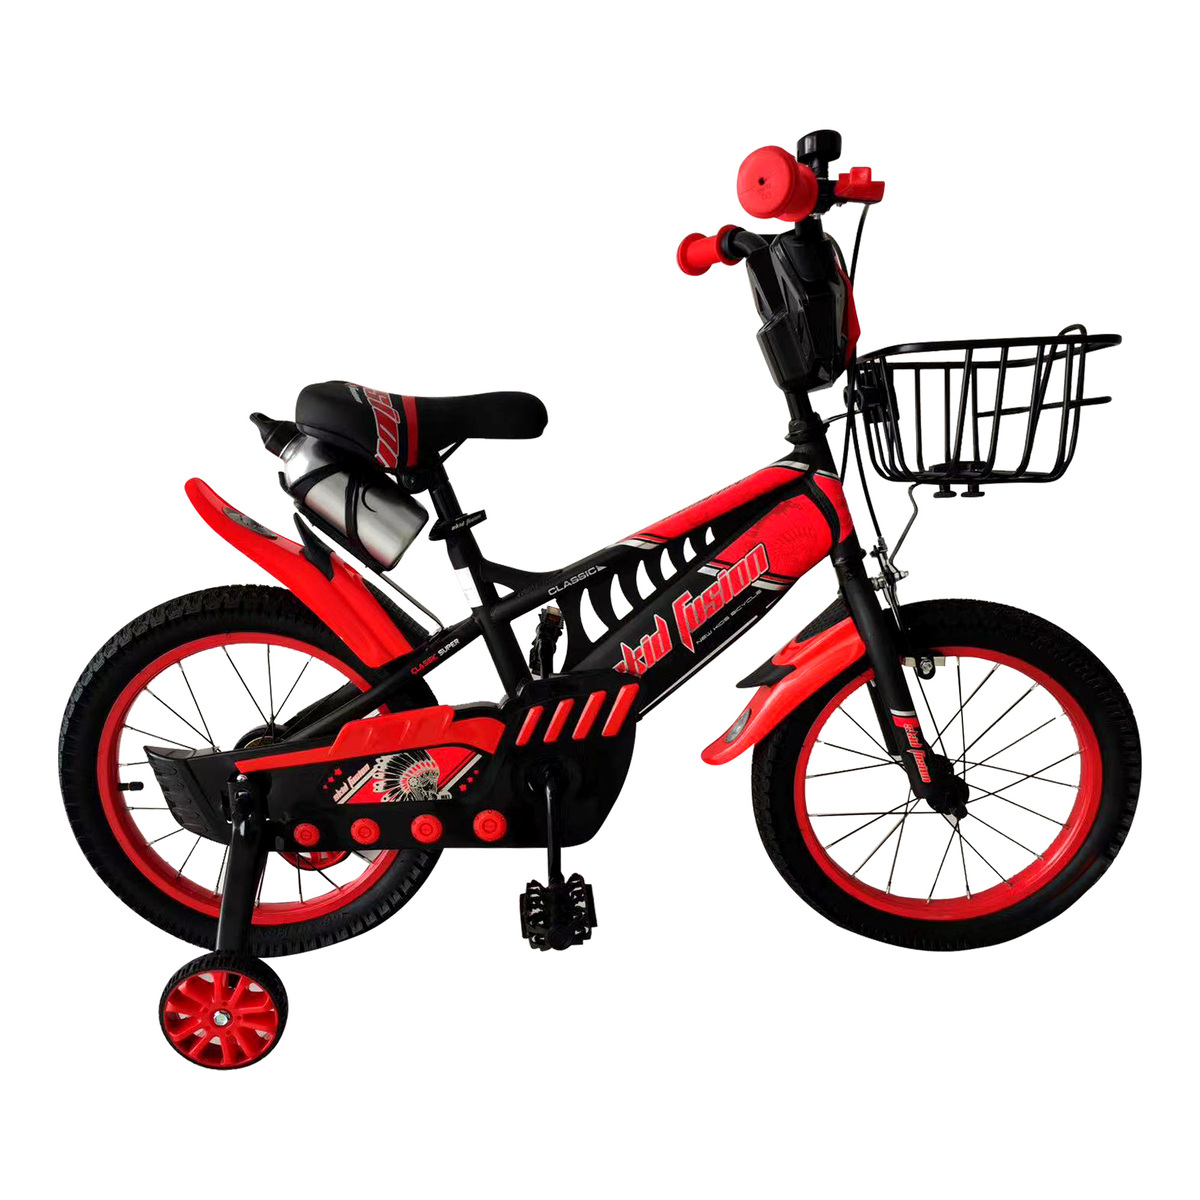 Skid Fusion Kids Bicycle 12" FB-12 Assorted